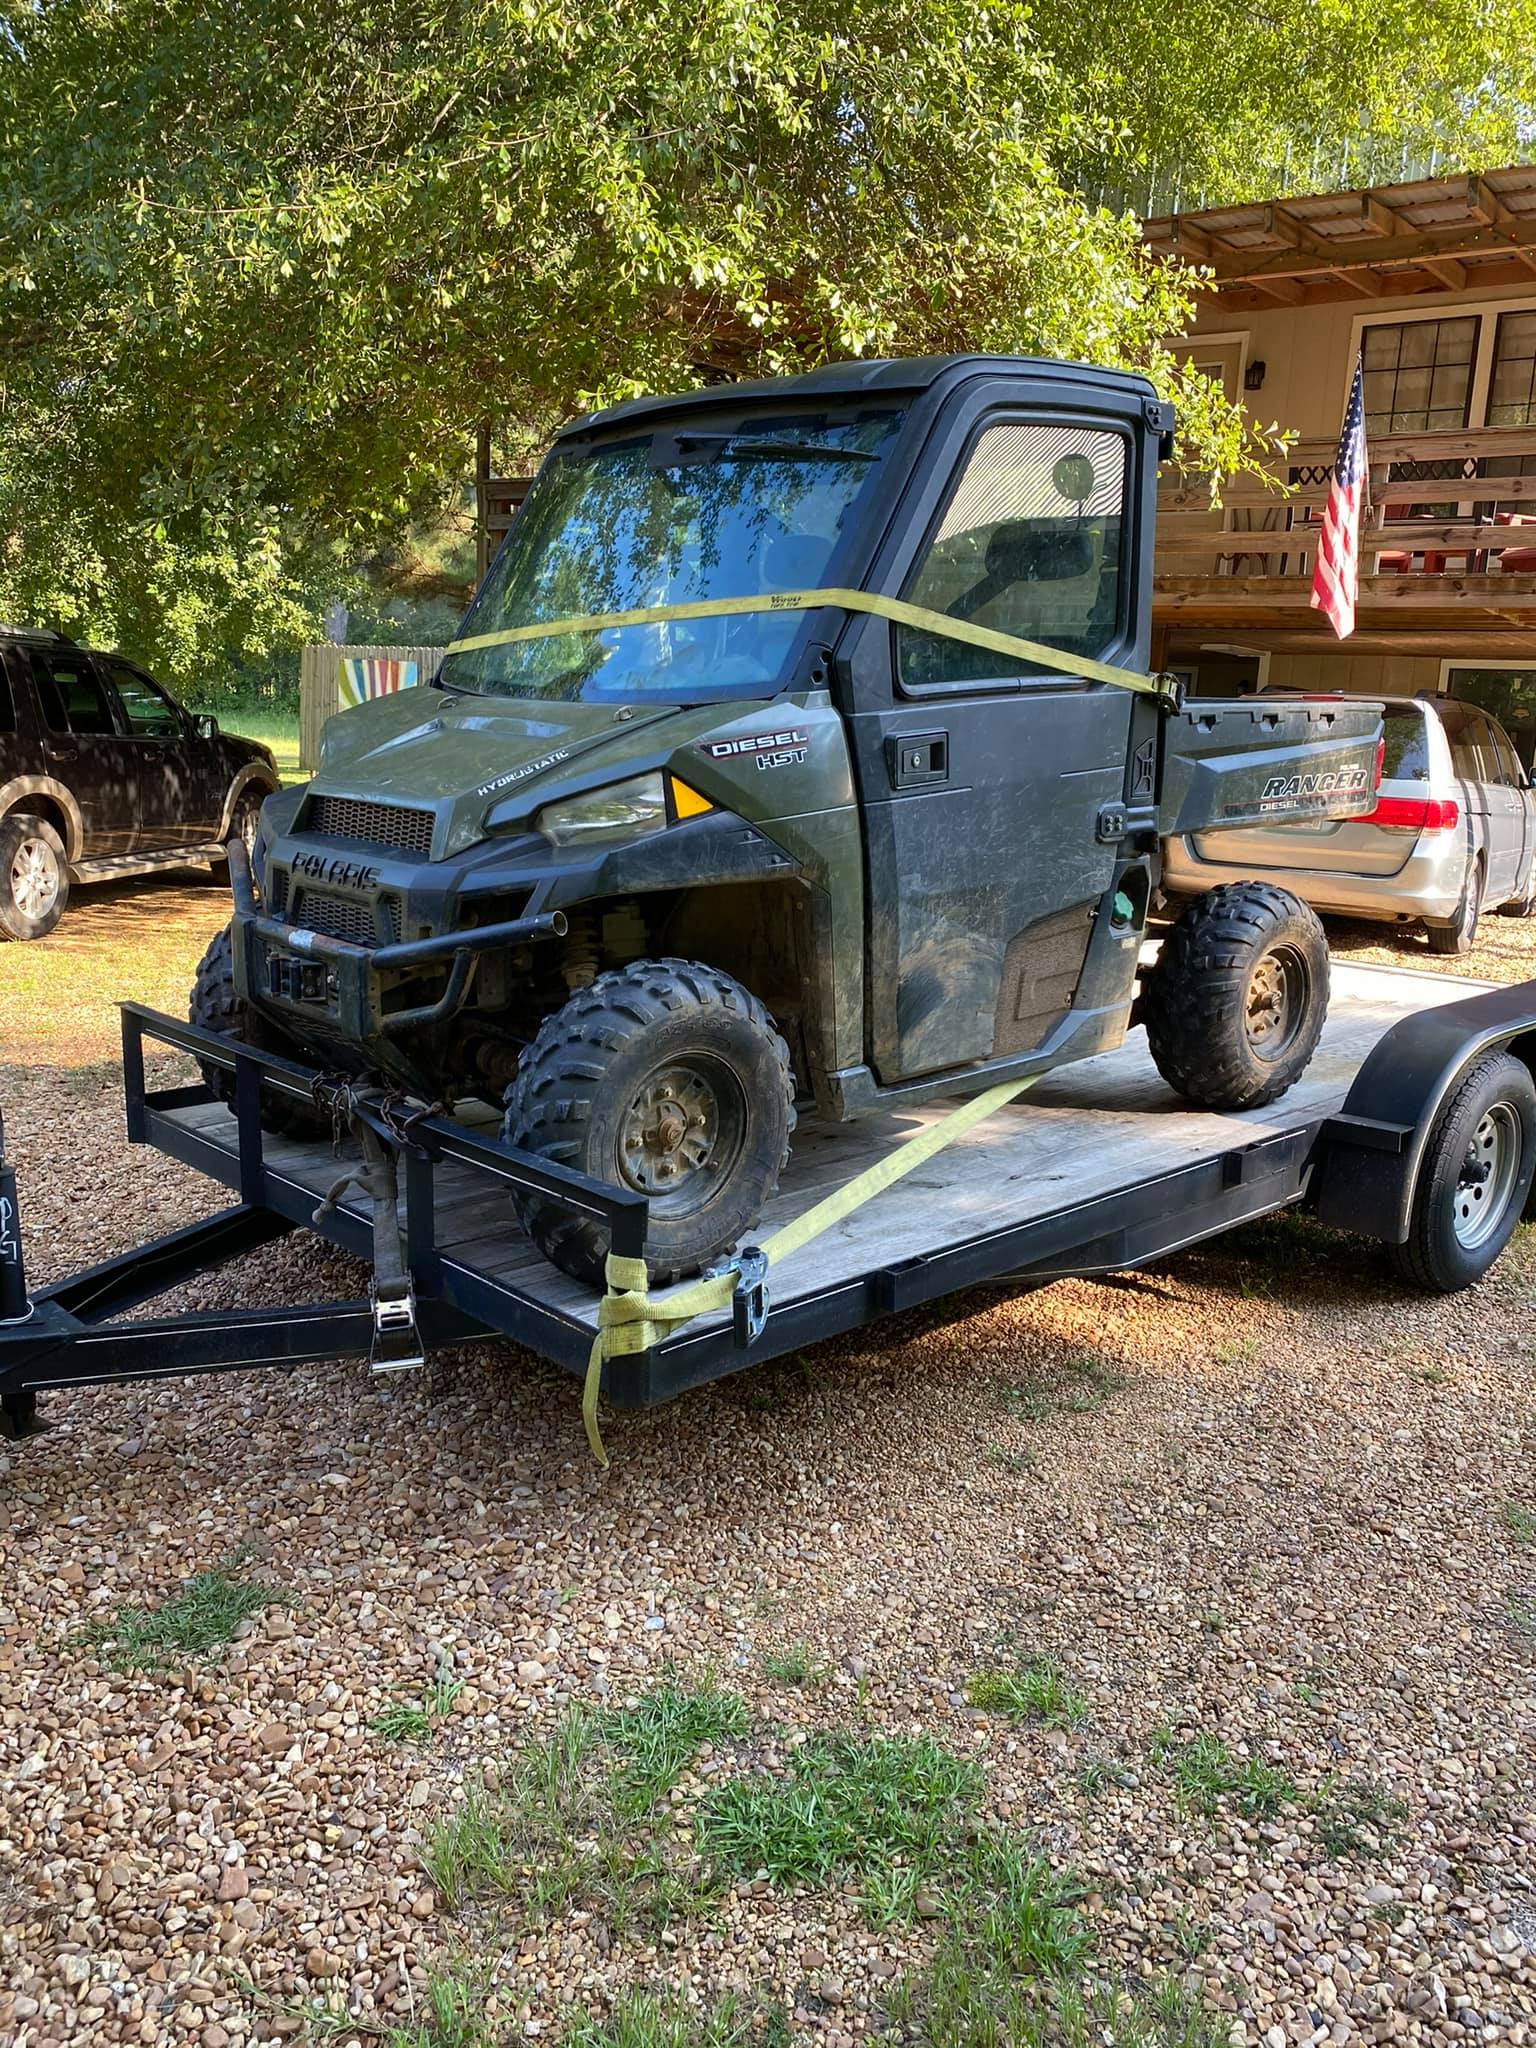 Closing Thoughts On Diesel Polaris Rangers